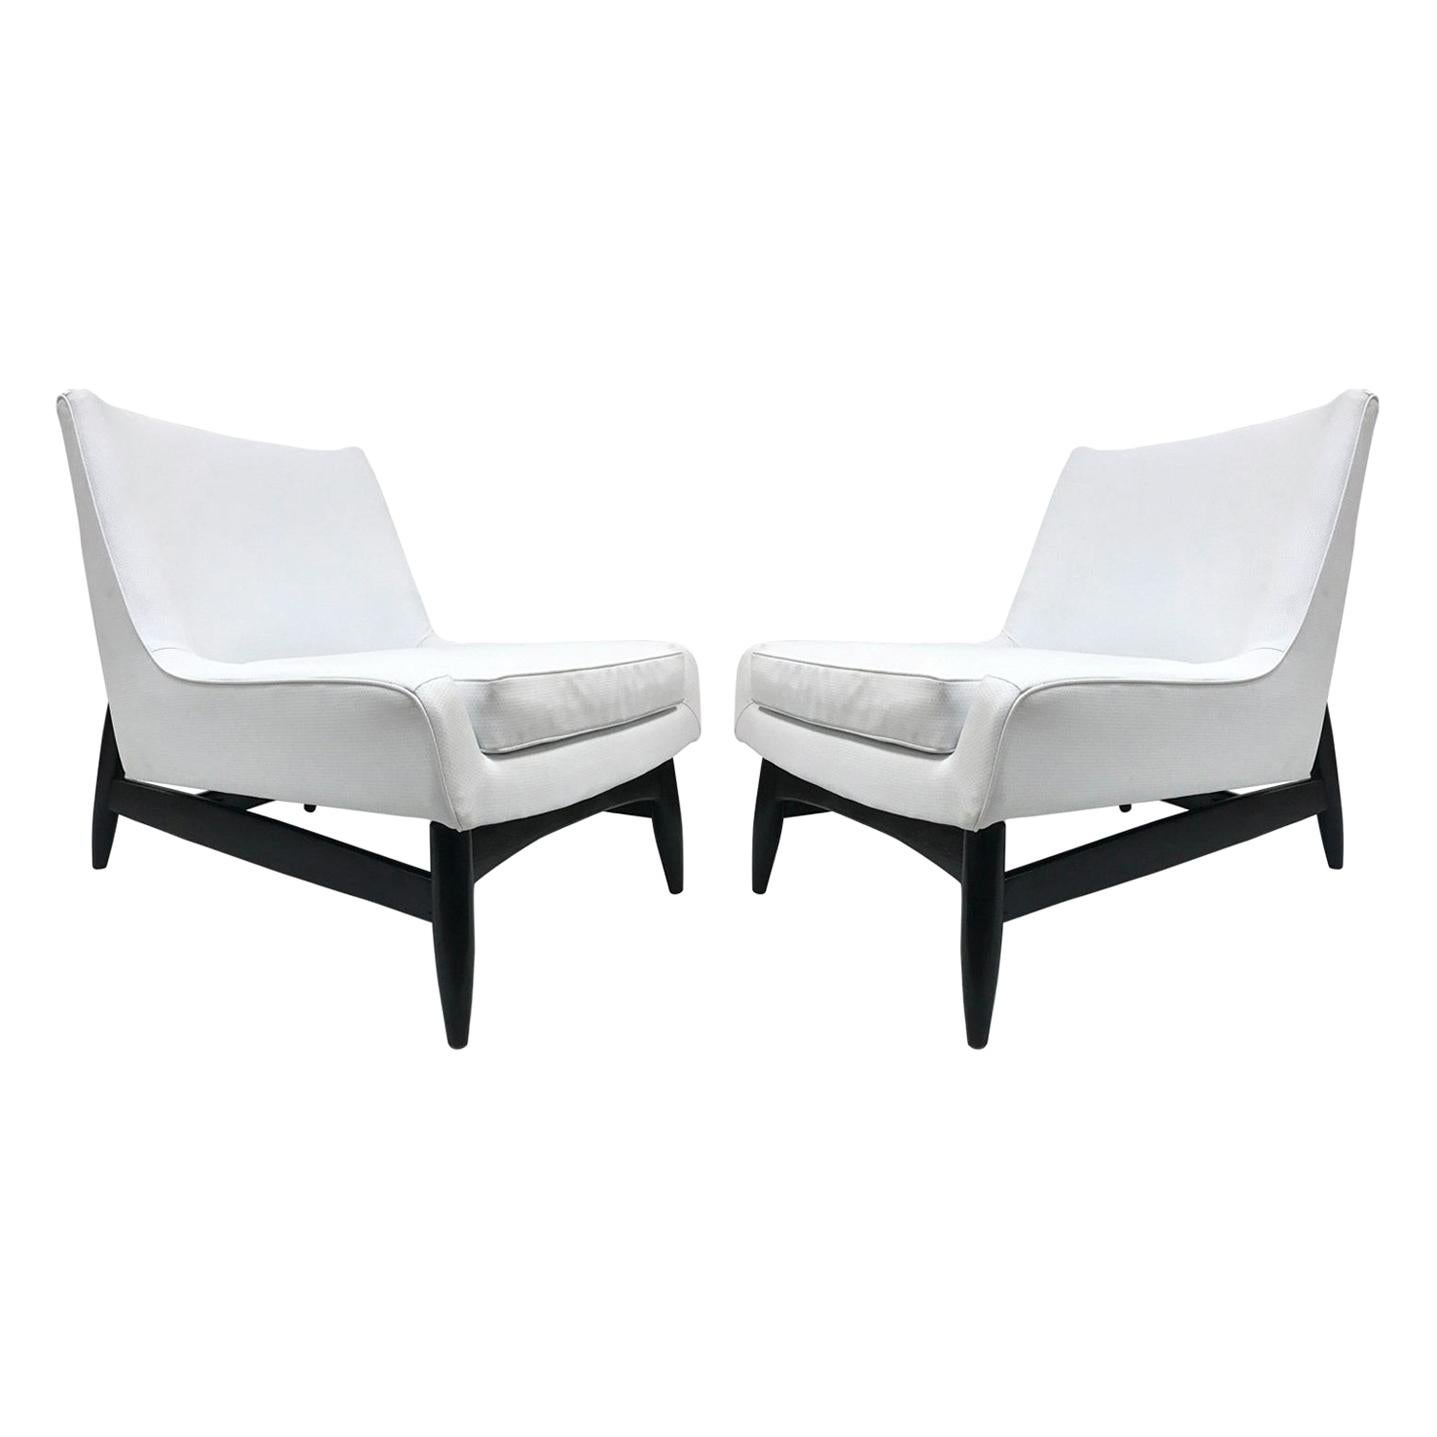 Pair of Paul McCobb Style Lounge Chairs